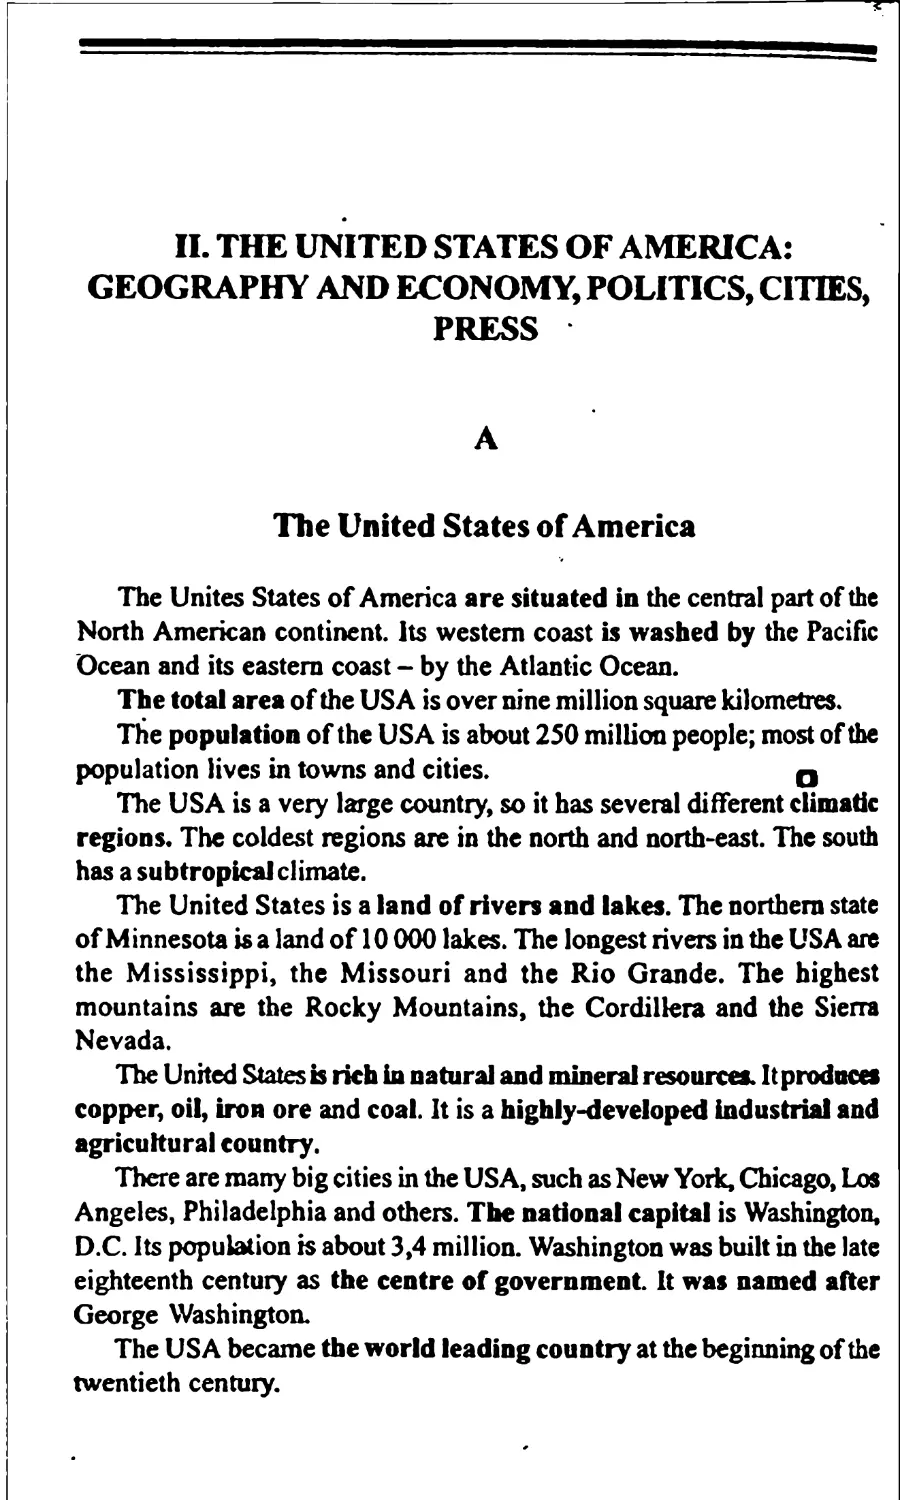 II. THE UNITED STATES OF AMERICA: GEOGRAPHY AND ECONOMY, POLITICS, CITIES, PRESS